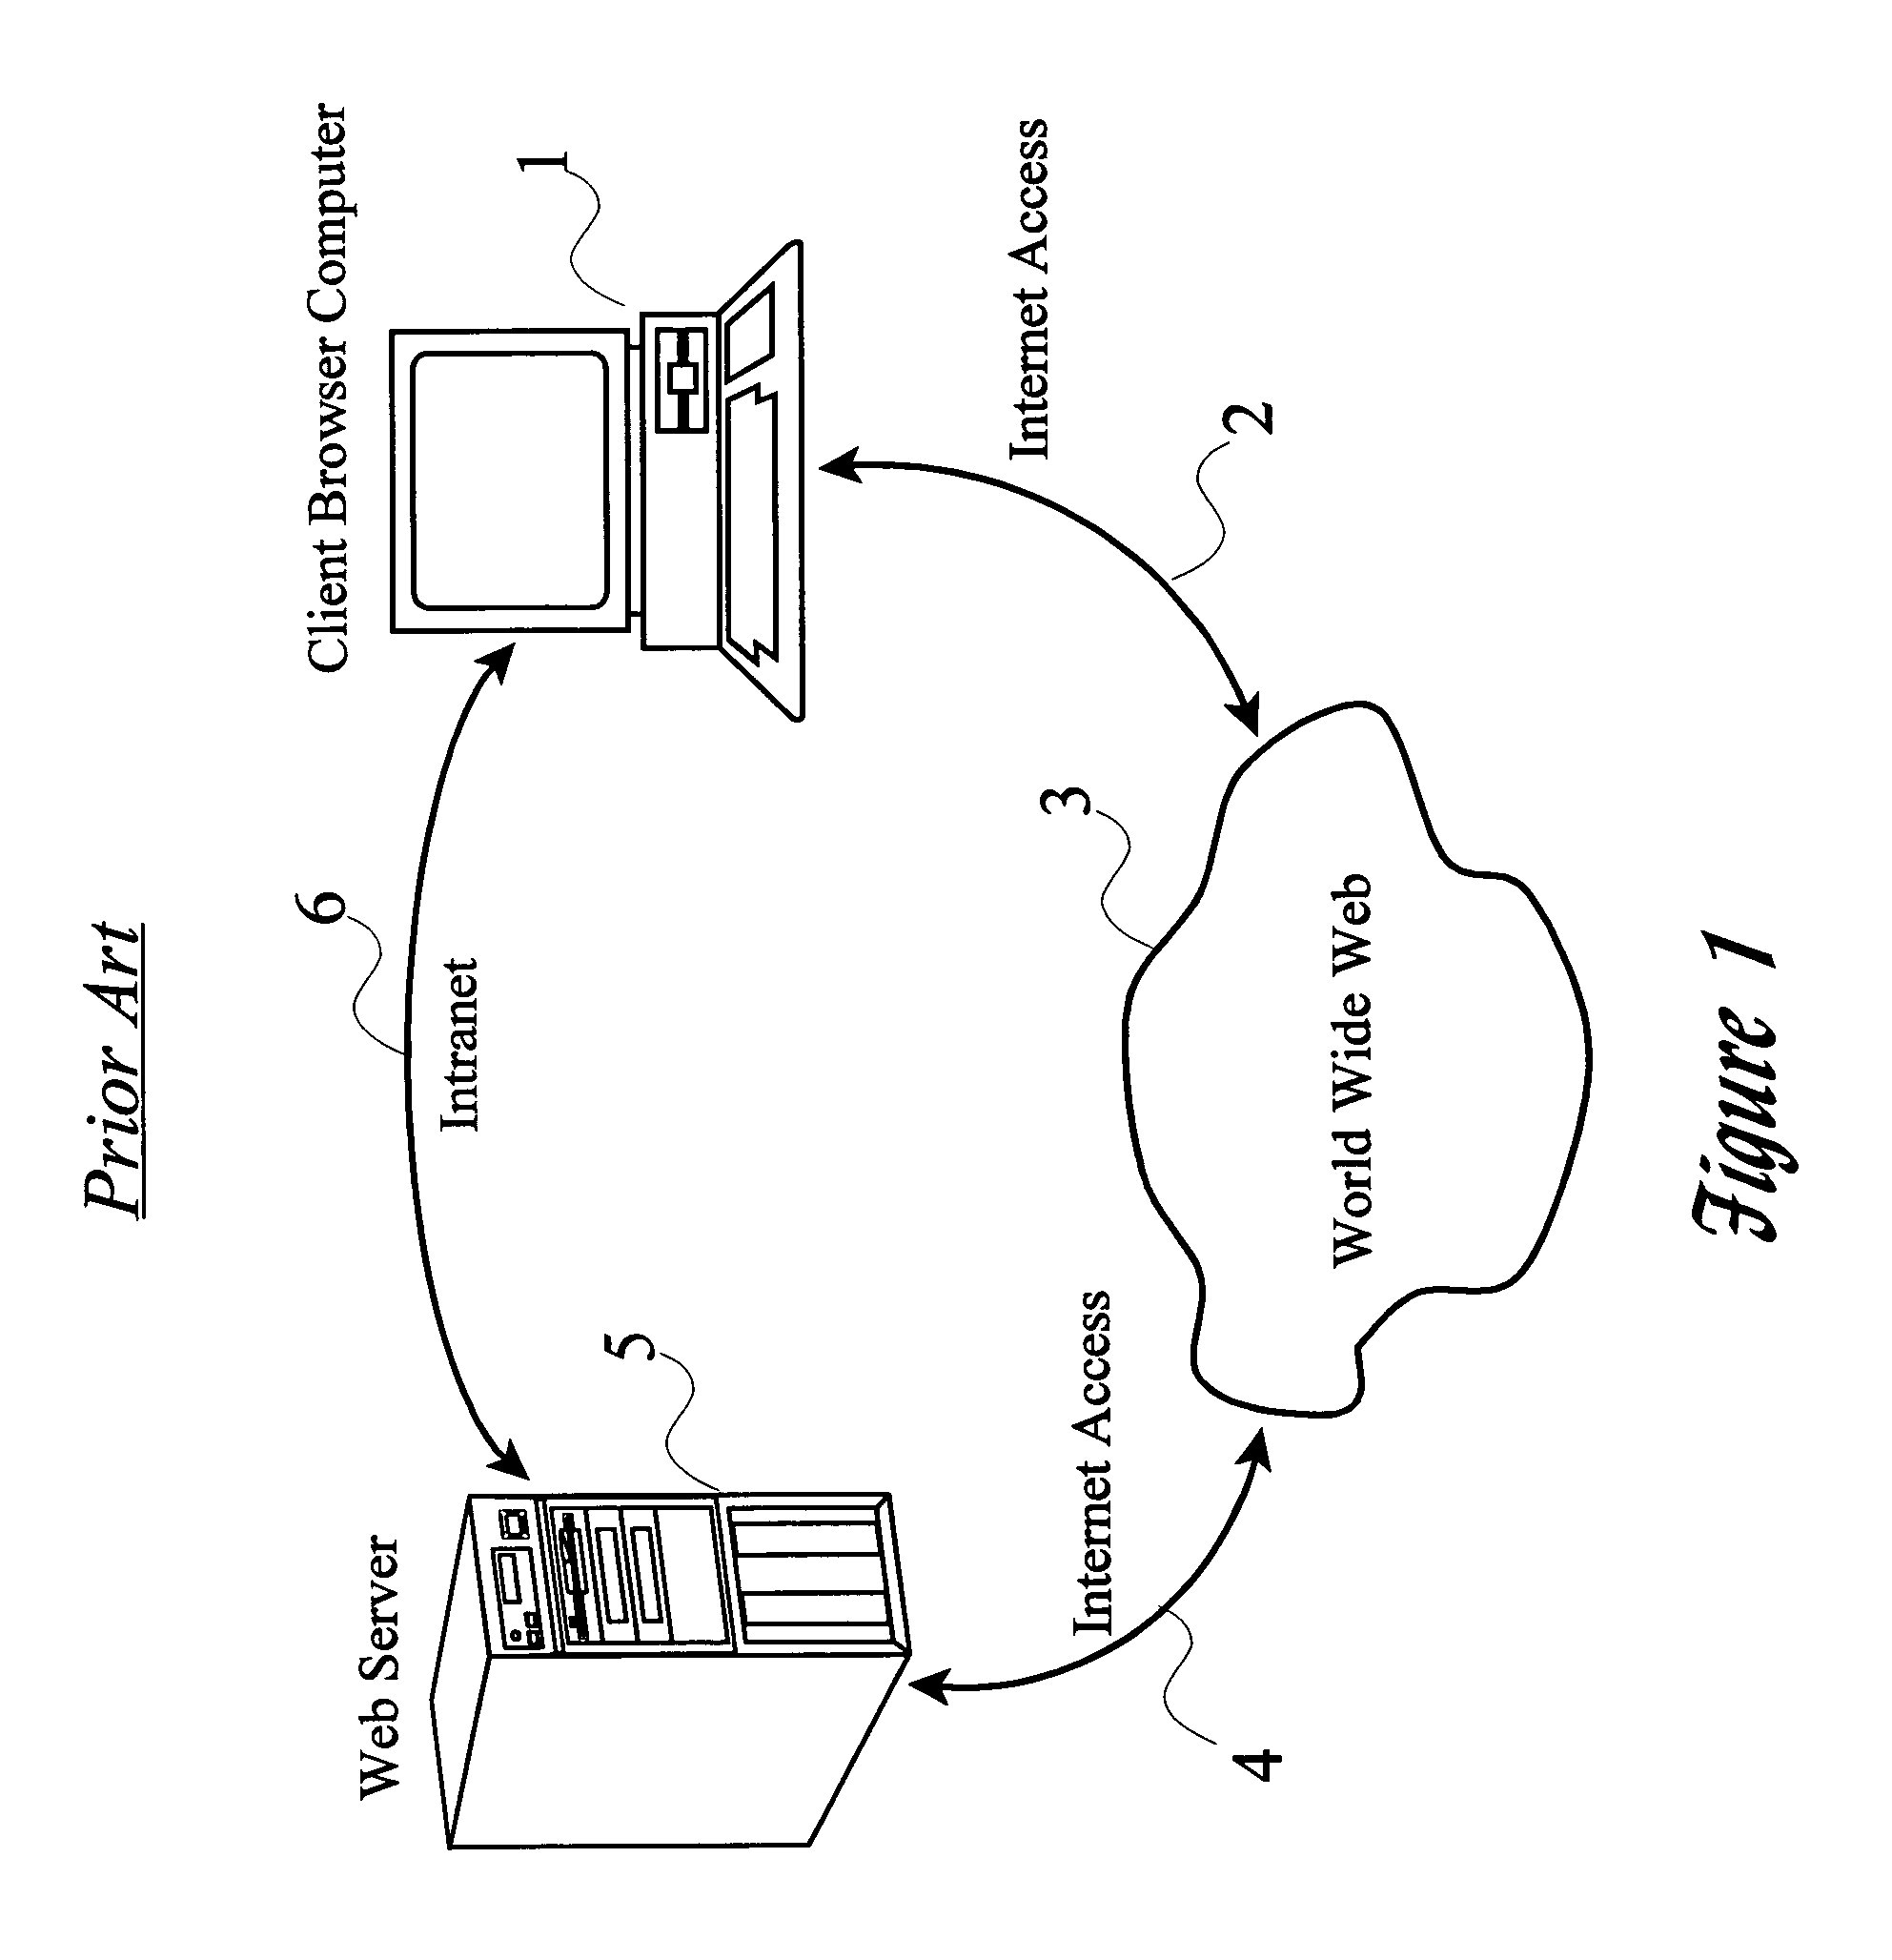 Method and system for producing dynamic web pages